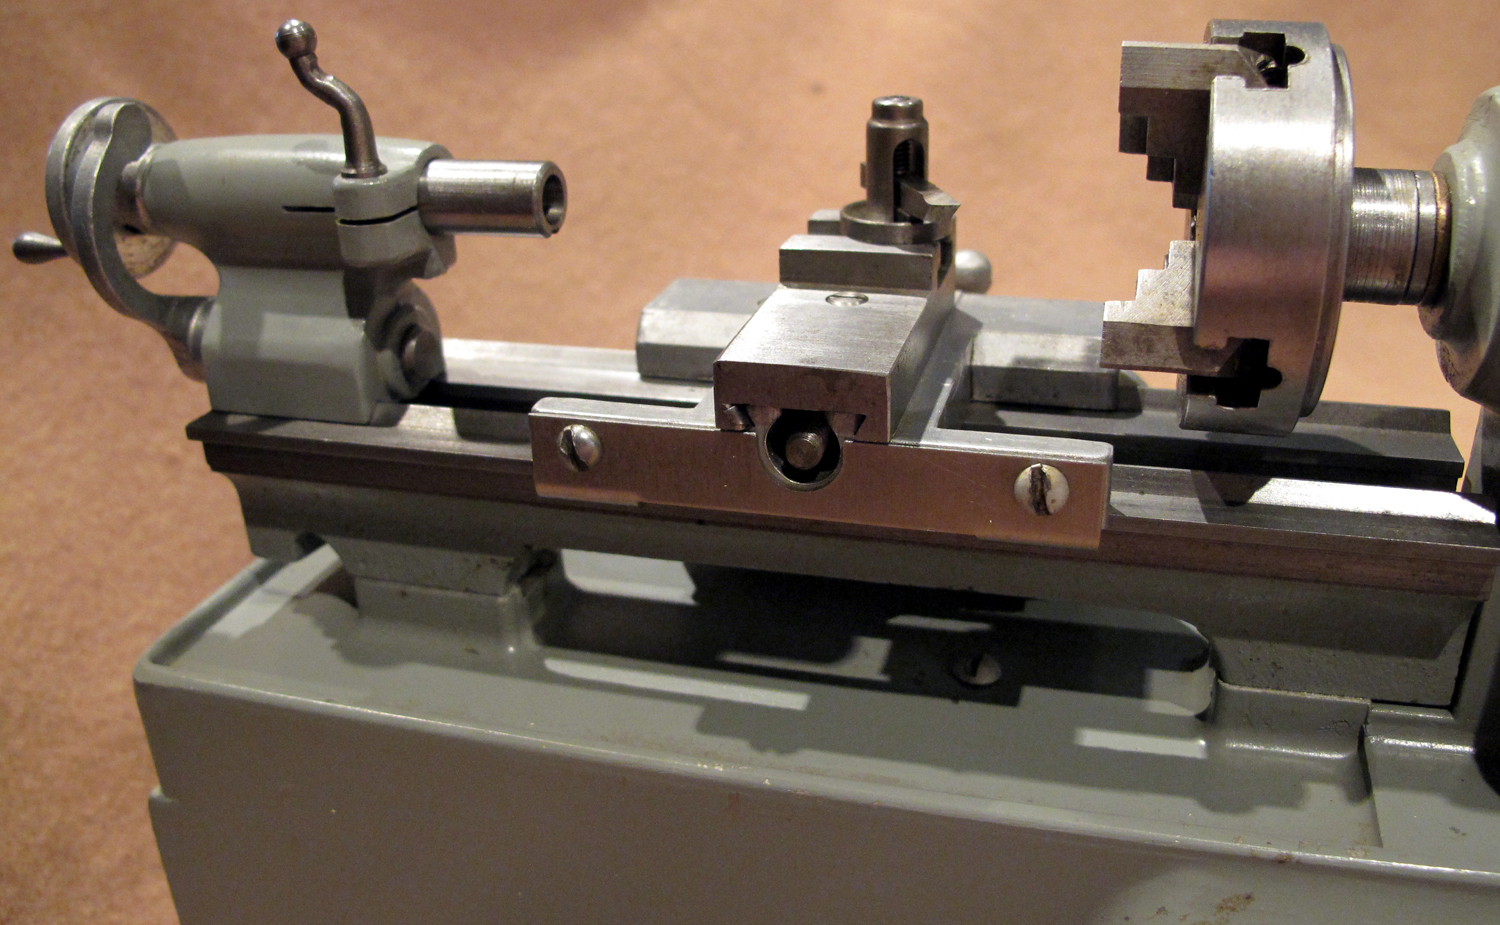 My Homemade Metal Lathe Project